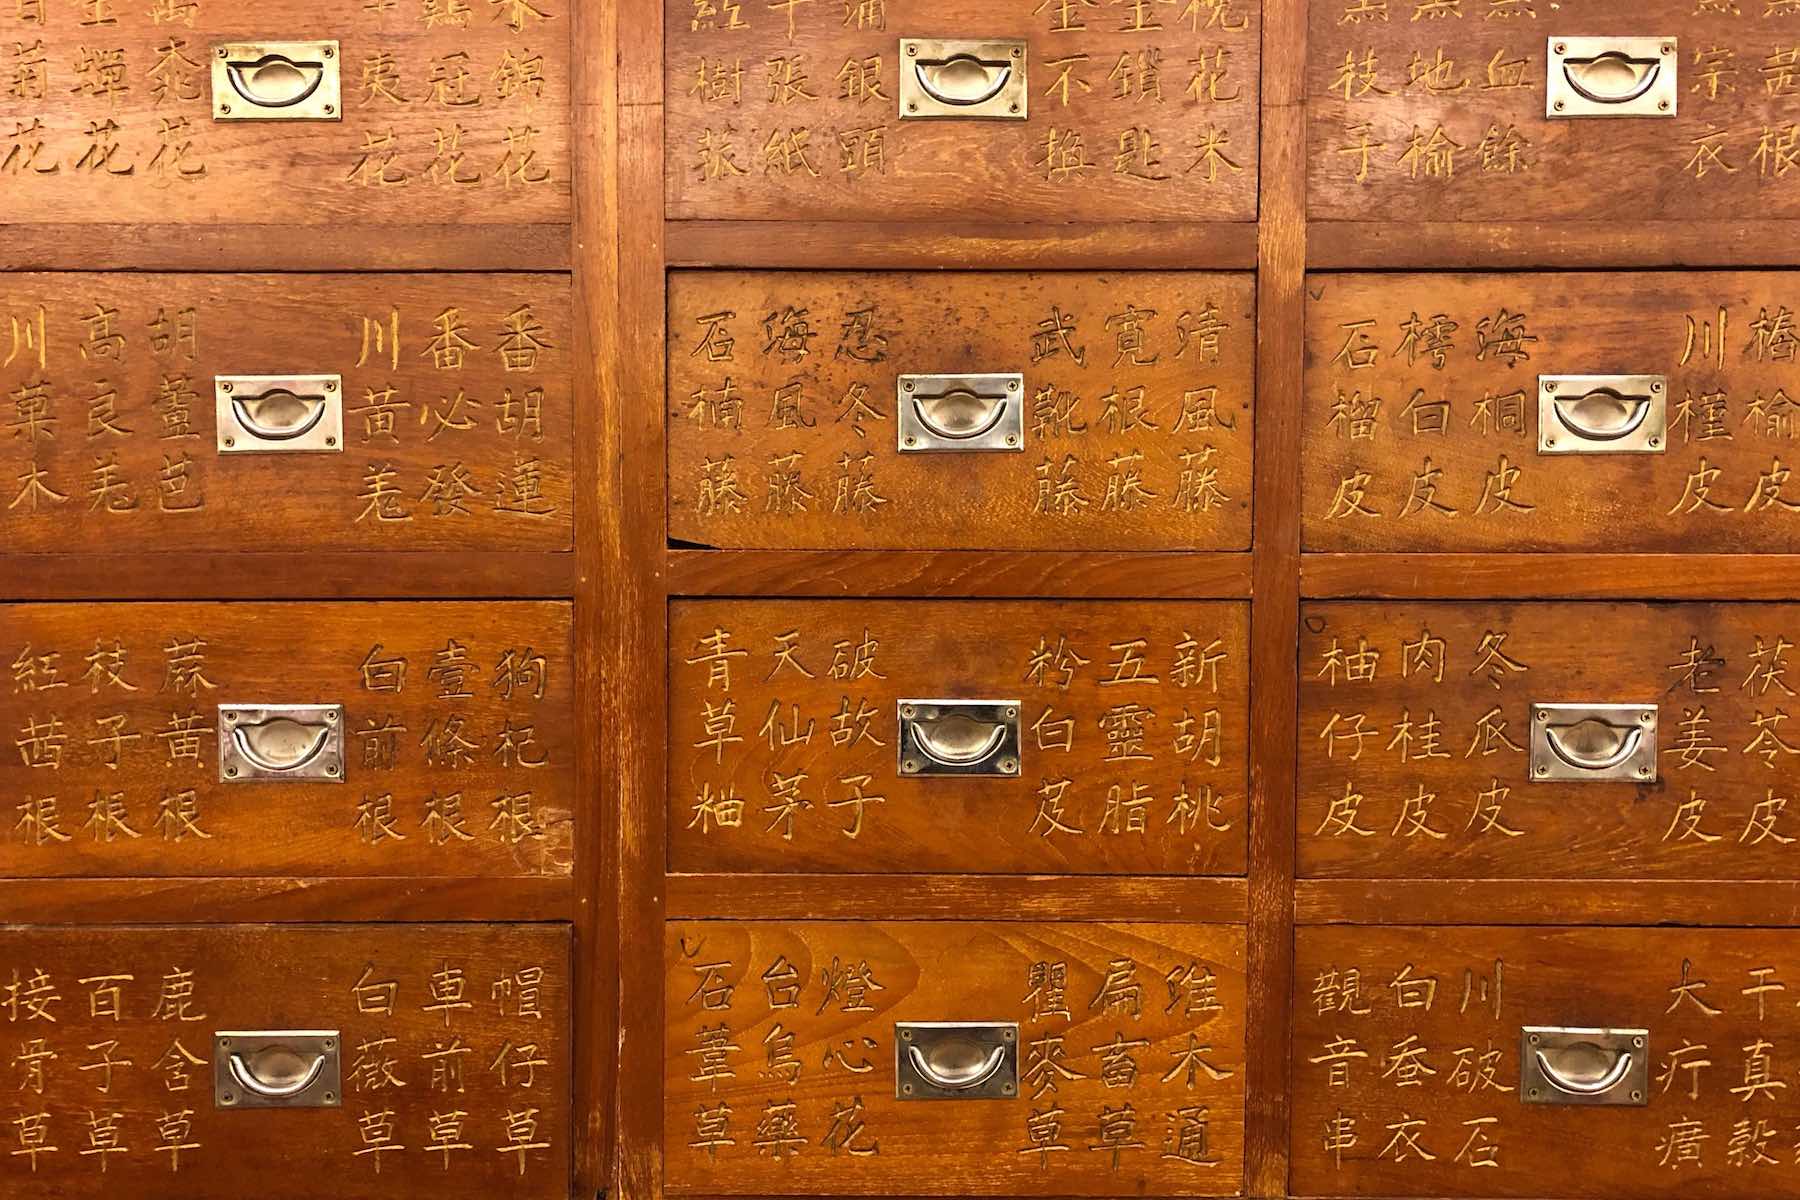 A close-up view of the medicine chest of a Traditional Chinese Medicine doctor
